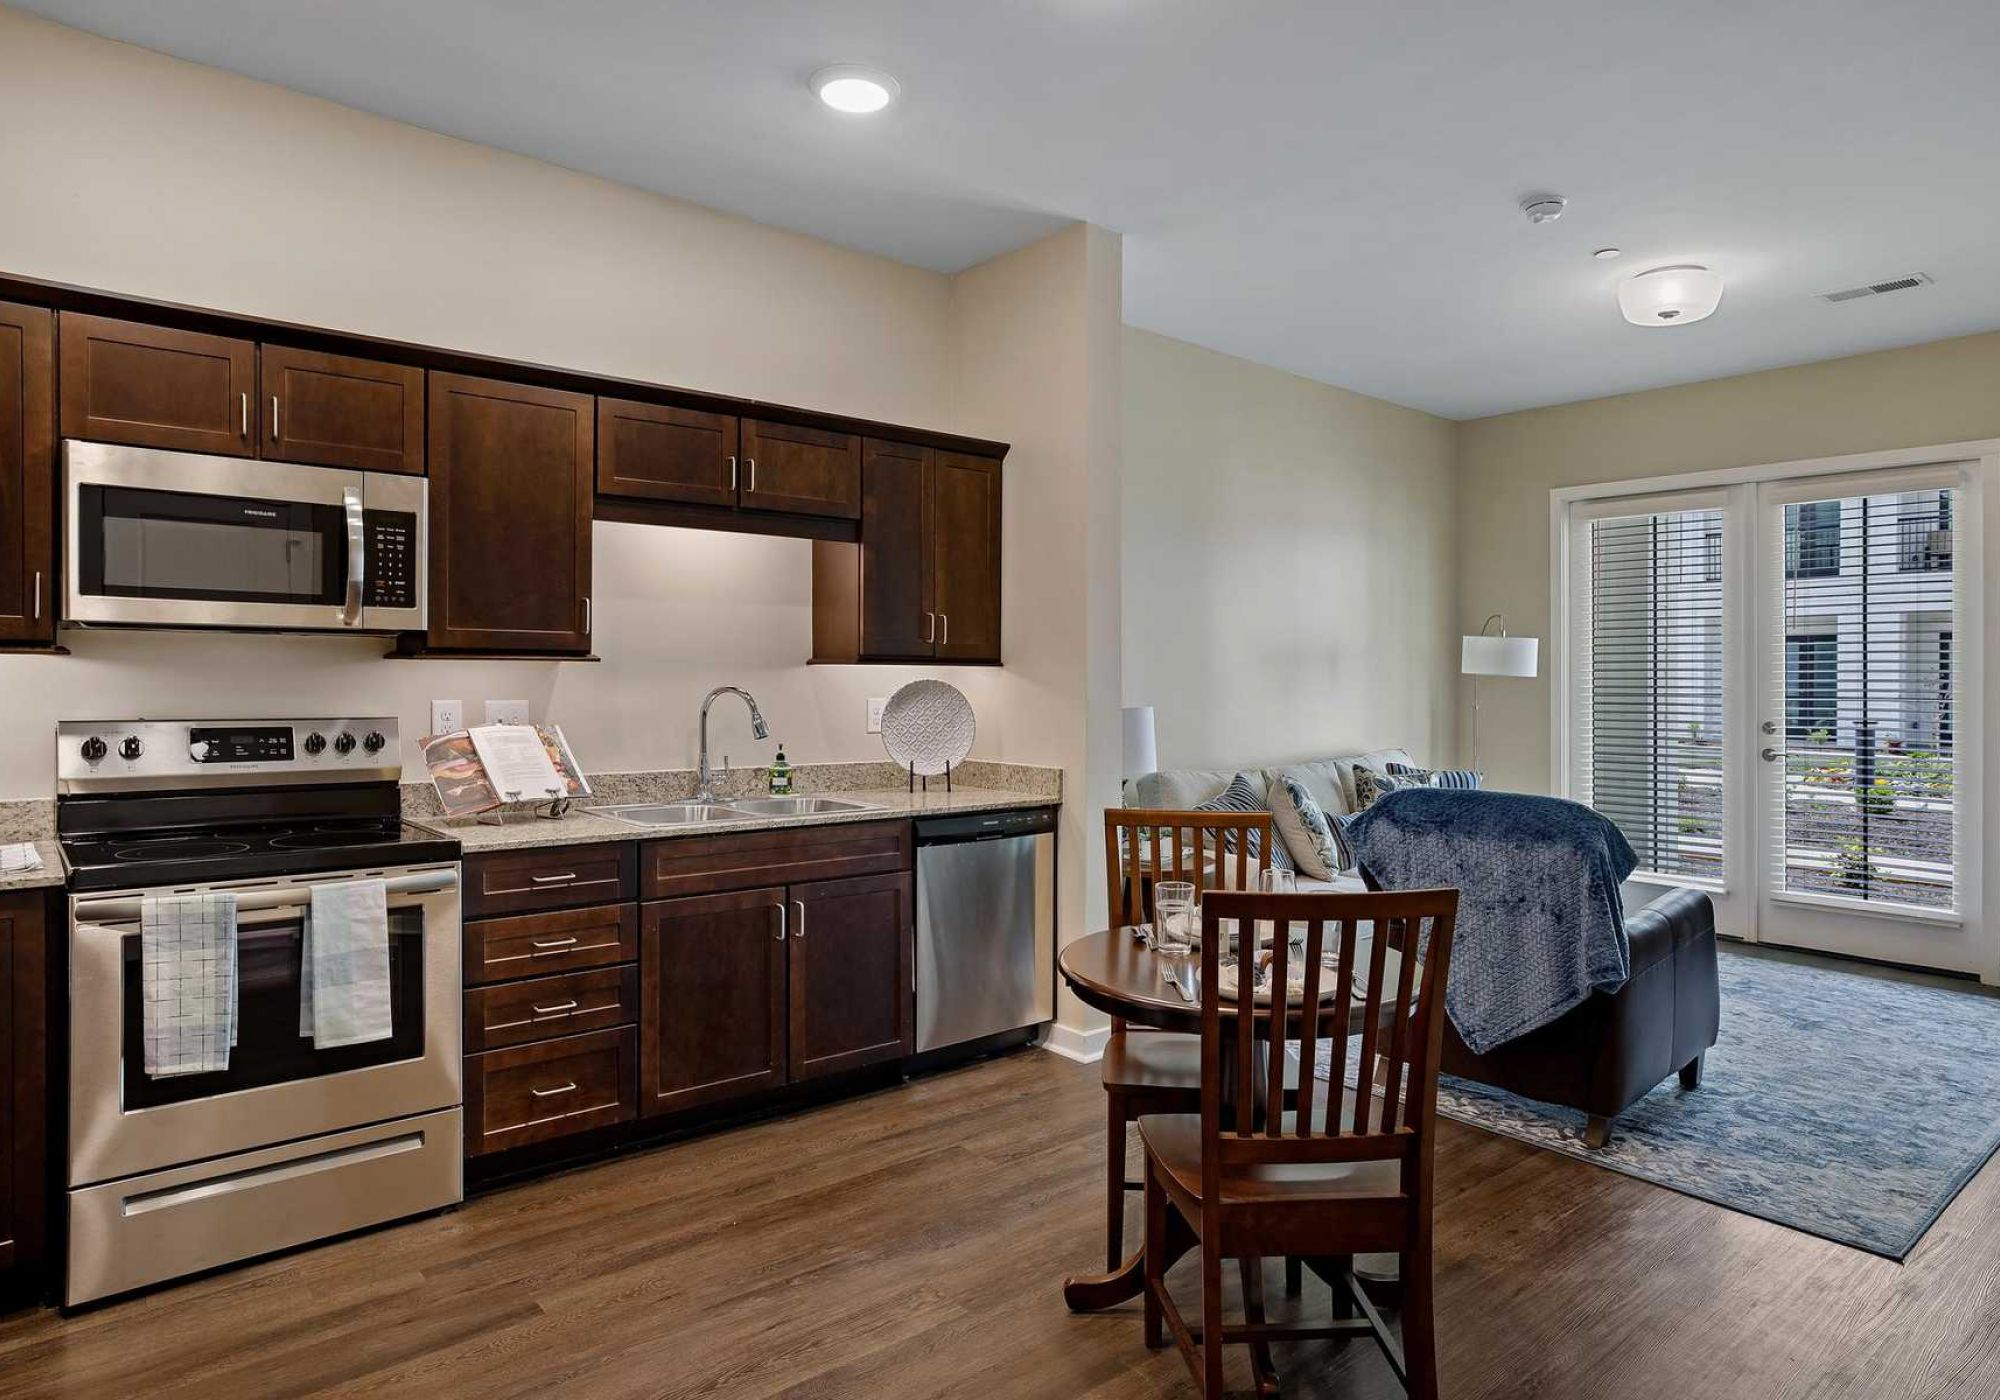 The Claiborne at Newnan Lakes senior living community full kitchen with high-end finishes